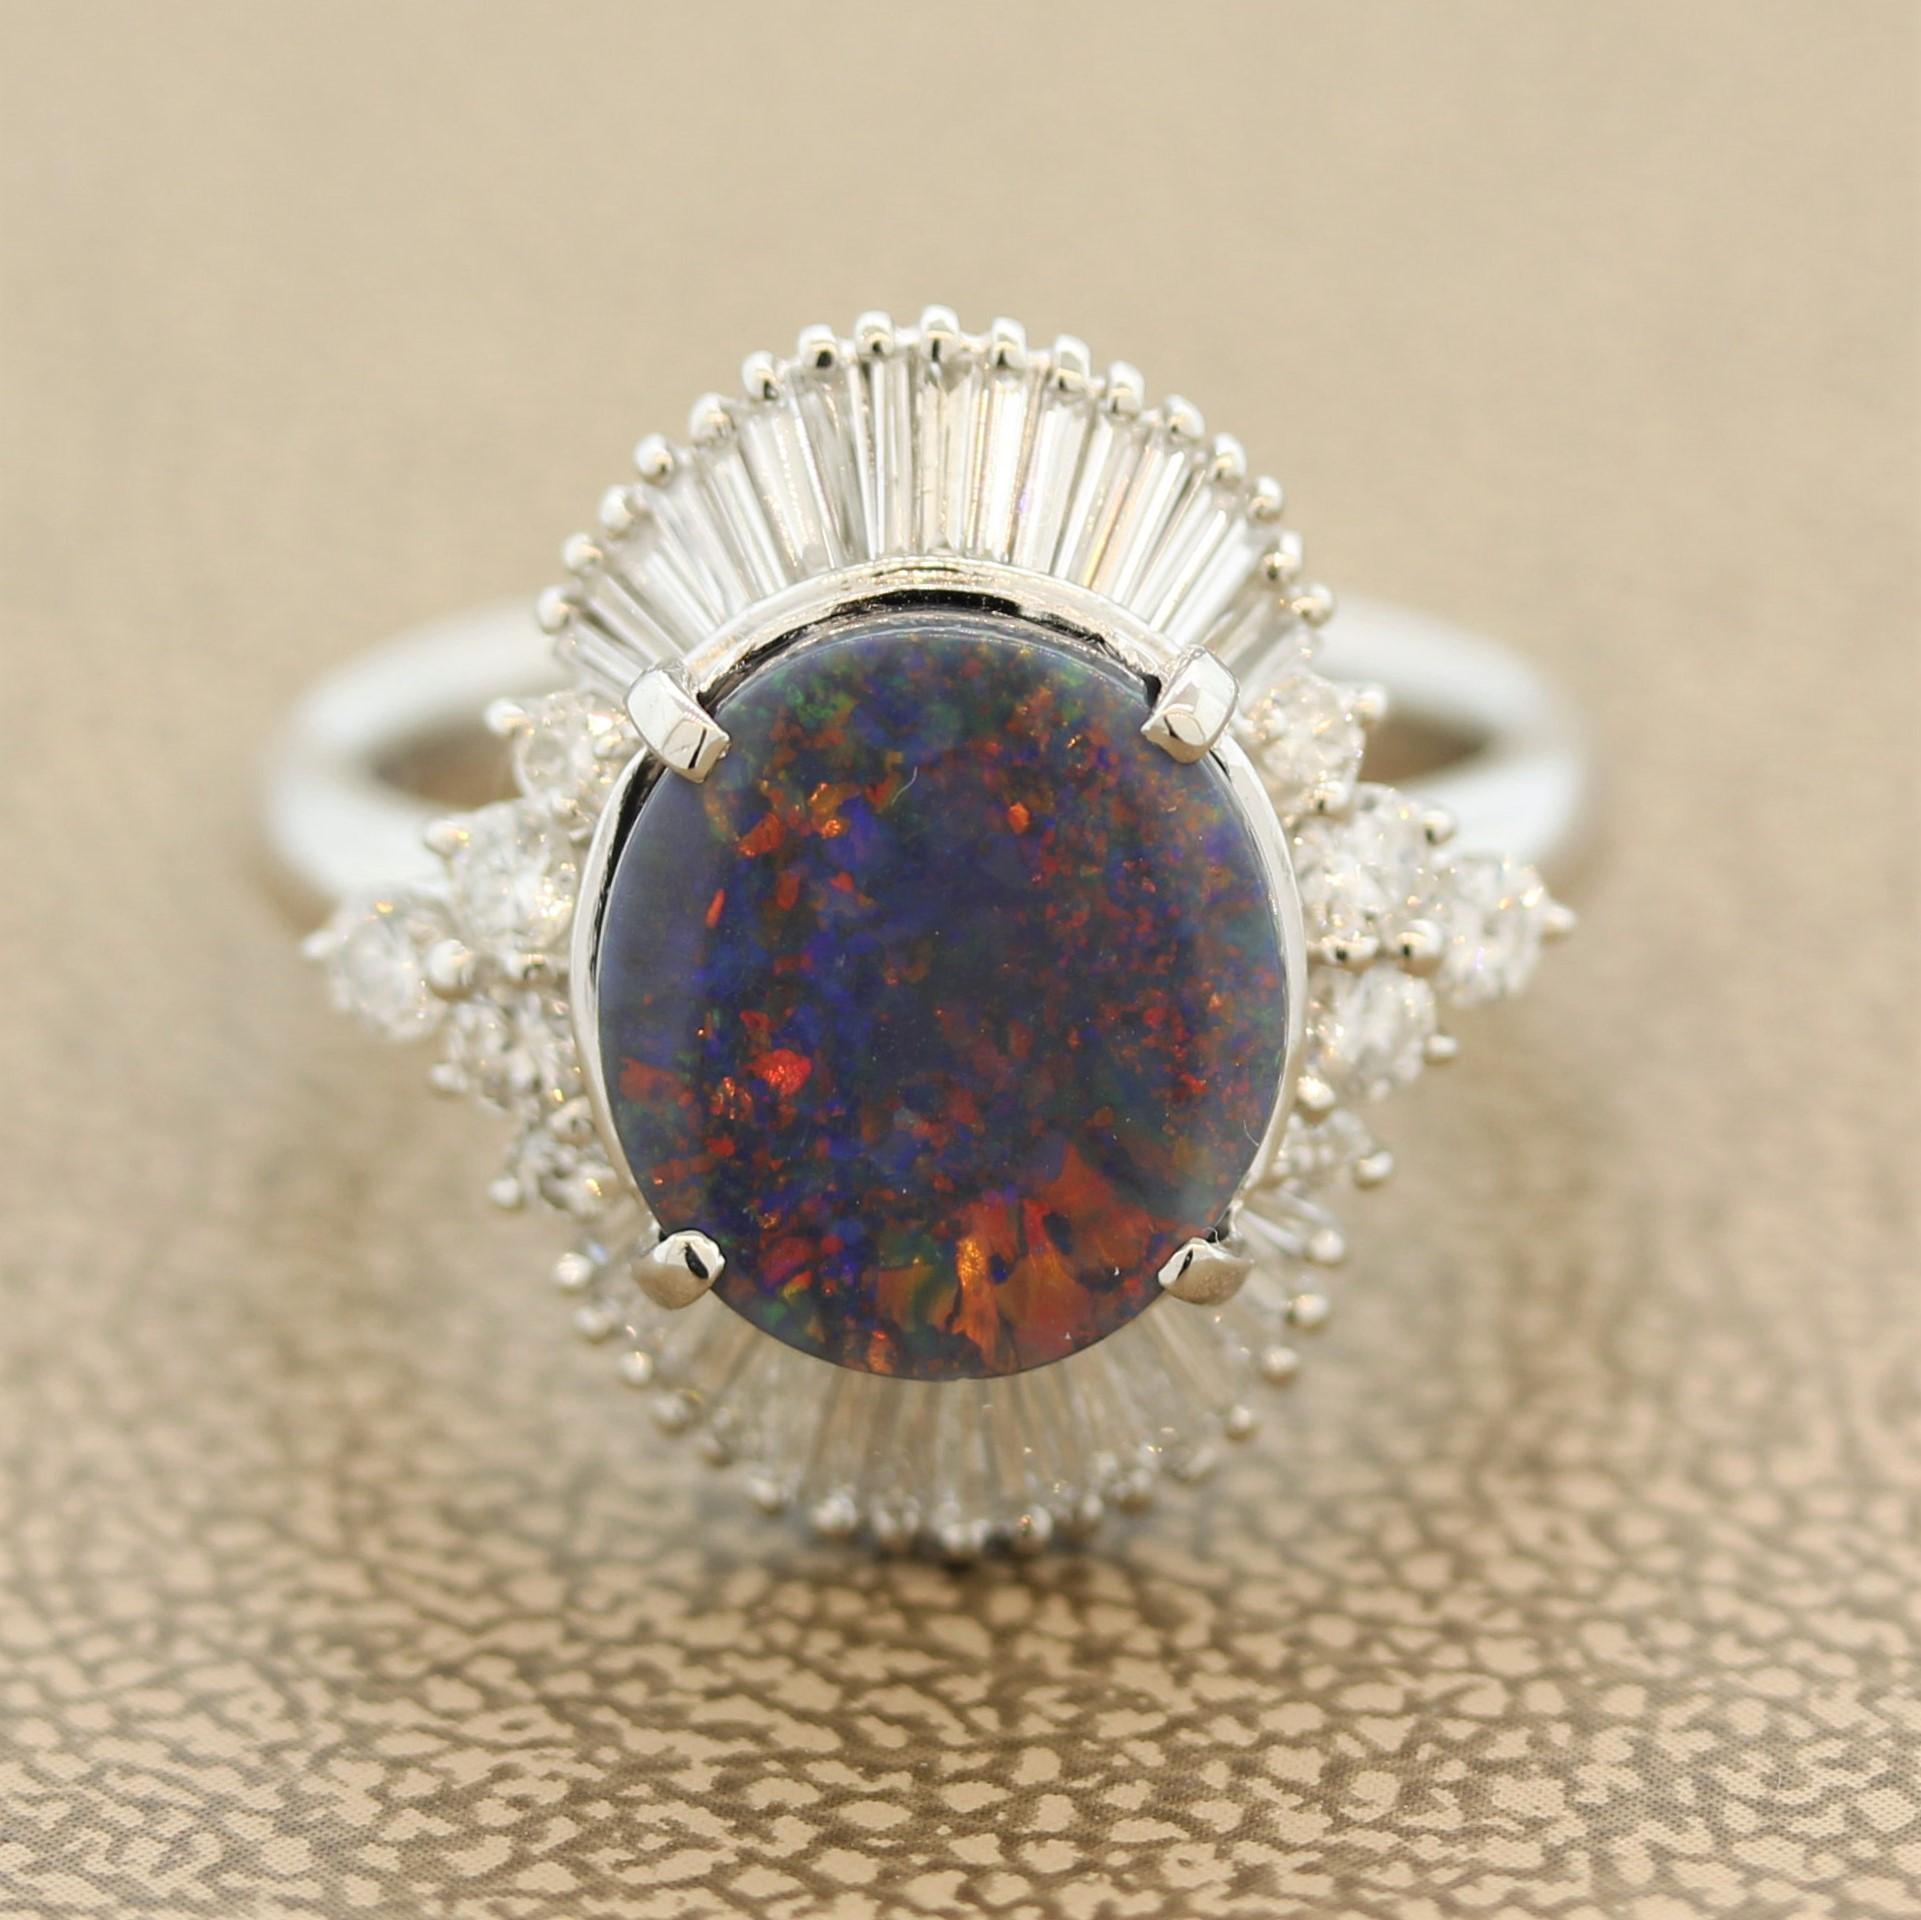 A classic Australian black opal with bright flashes of color! This black opal, most likely from Lightning Ridge in Australia, weighs 2.57 carats and has fine play-of-color, mainly reds and oranges with some blues and purples. It is surrounded by